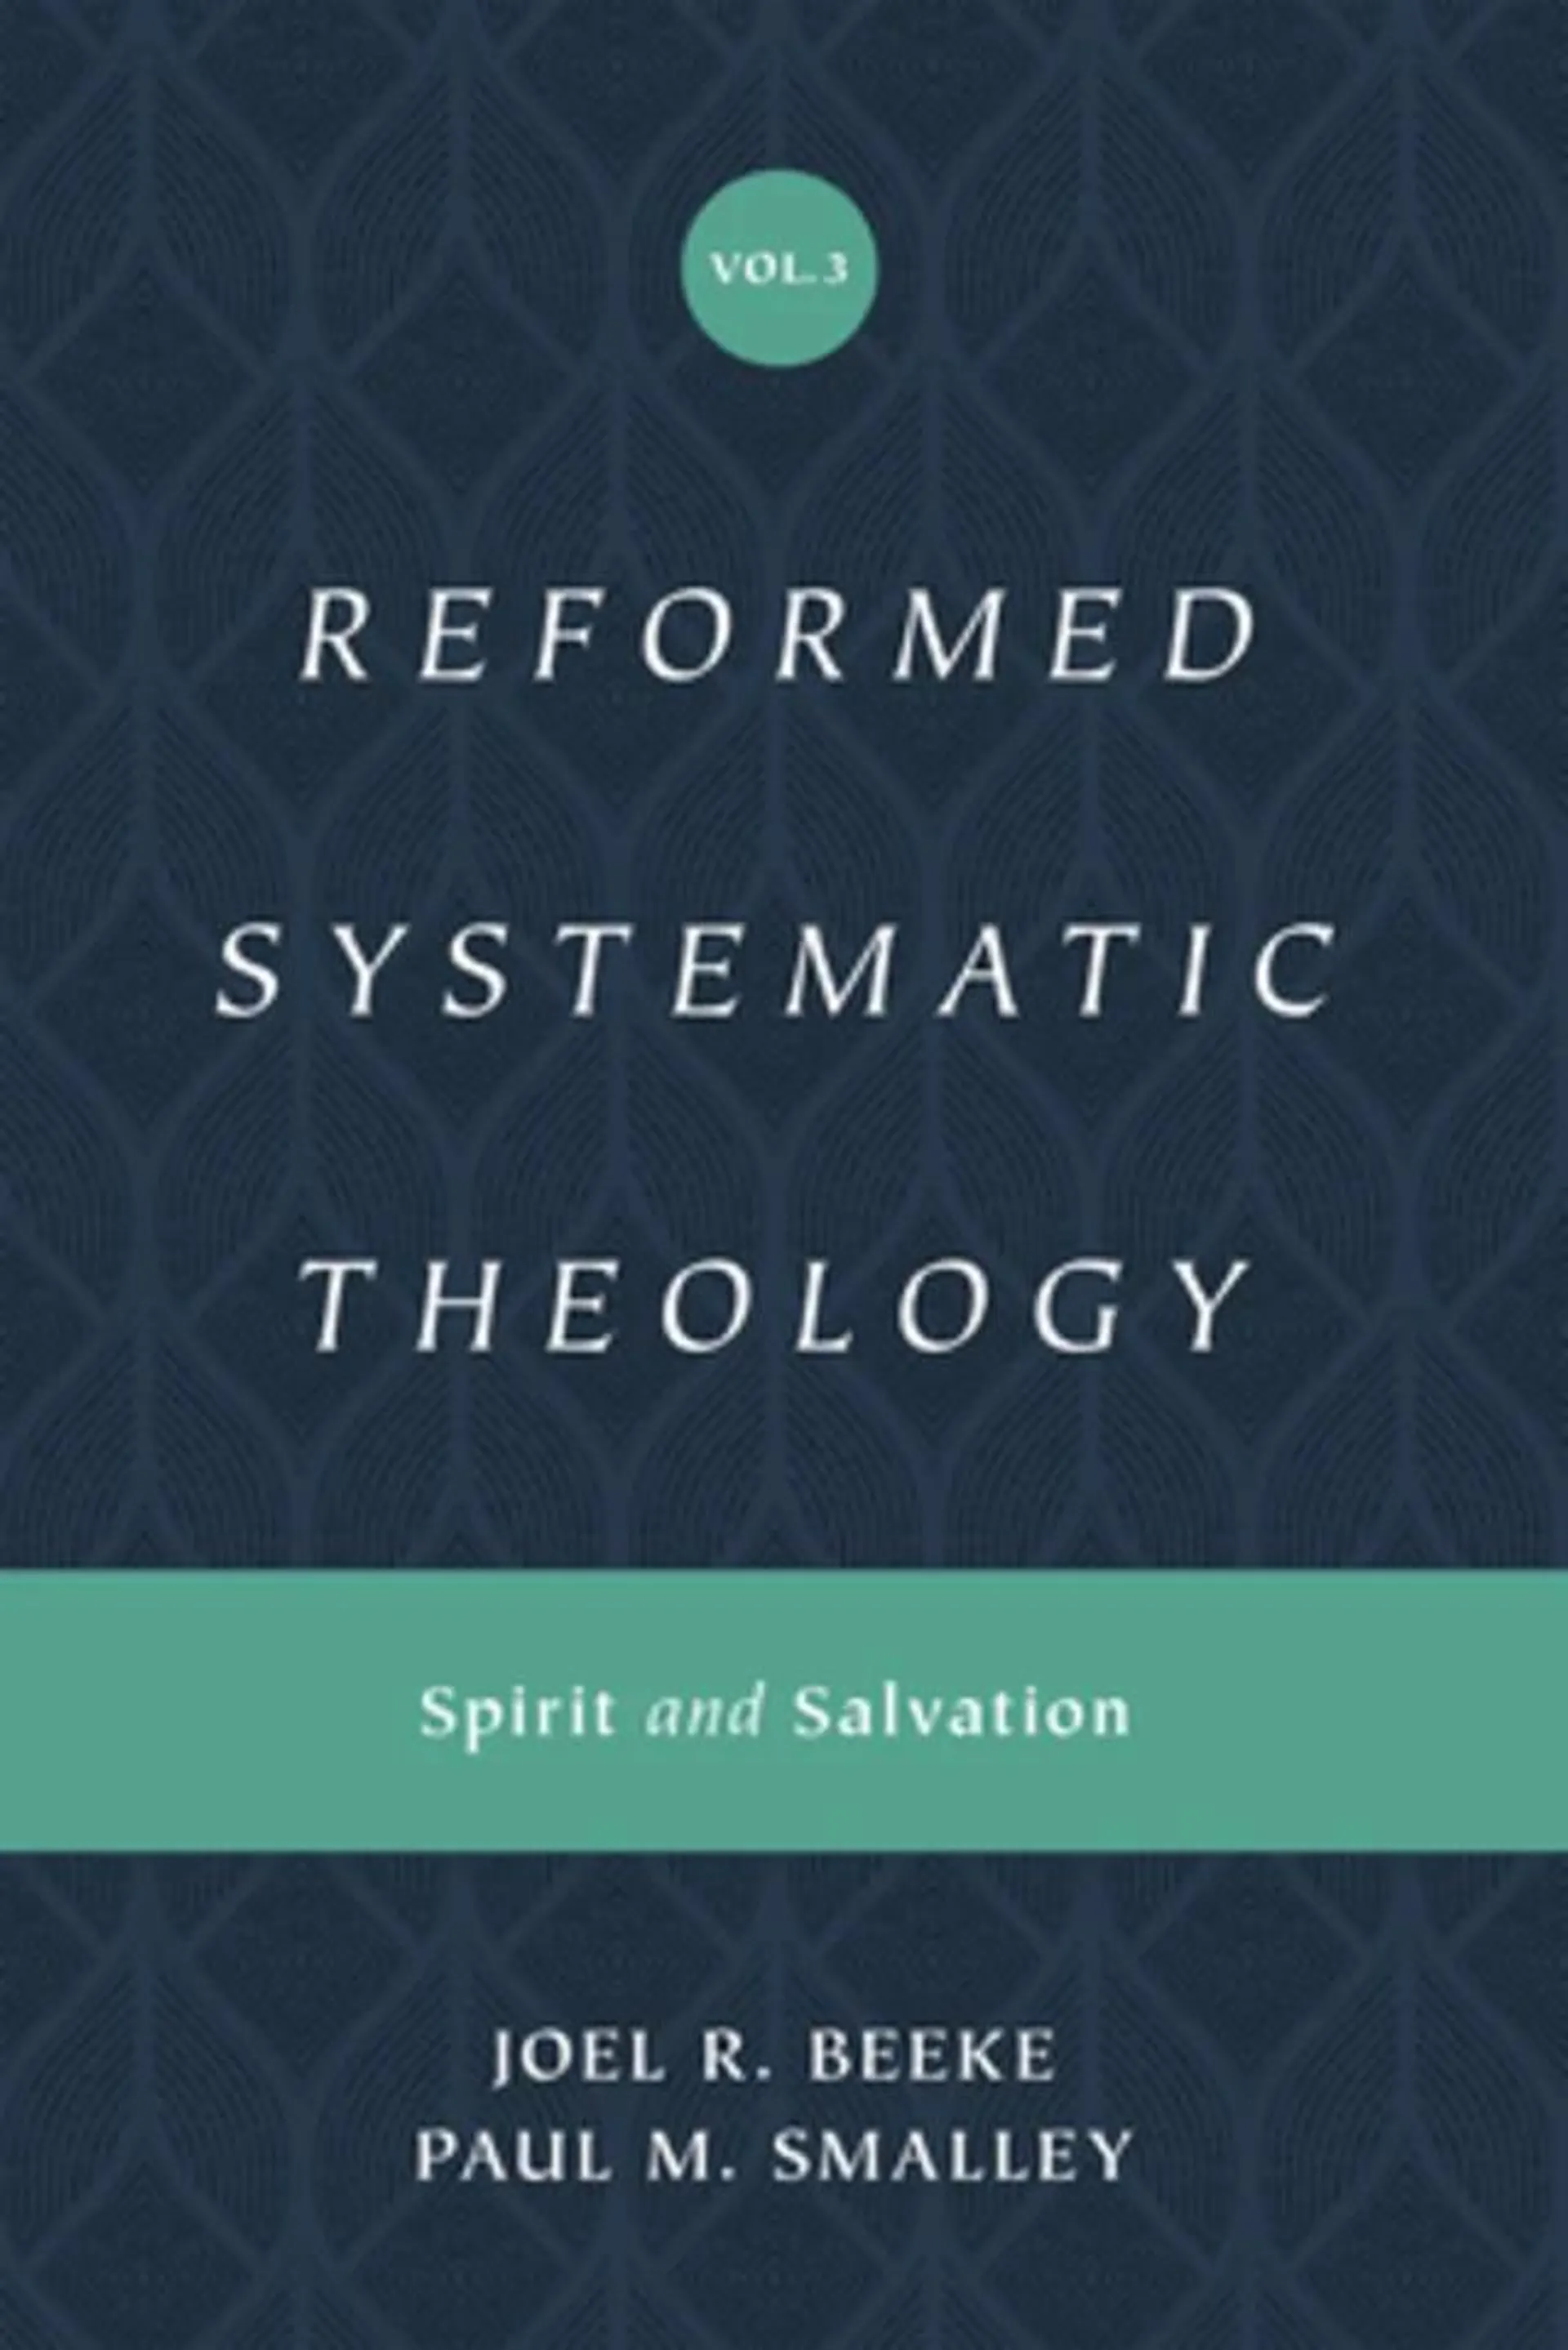 Reformed Systematic Theology: Spirit and Salvation (#03 in Reformed Systematic Theology Series)